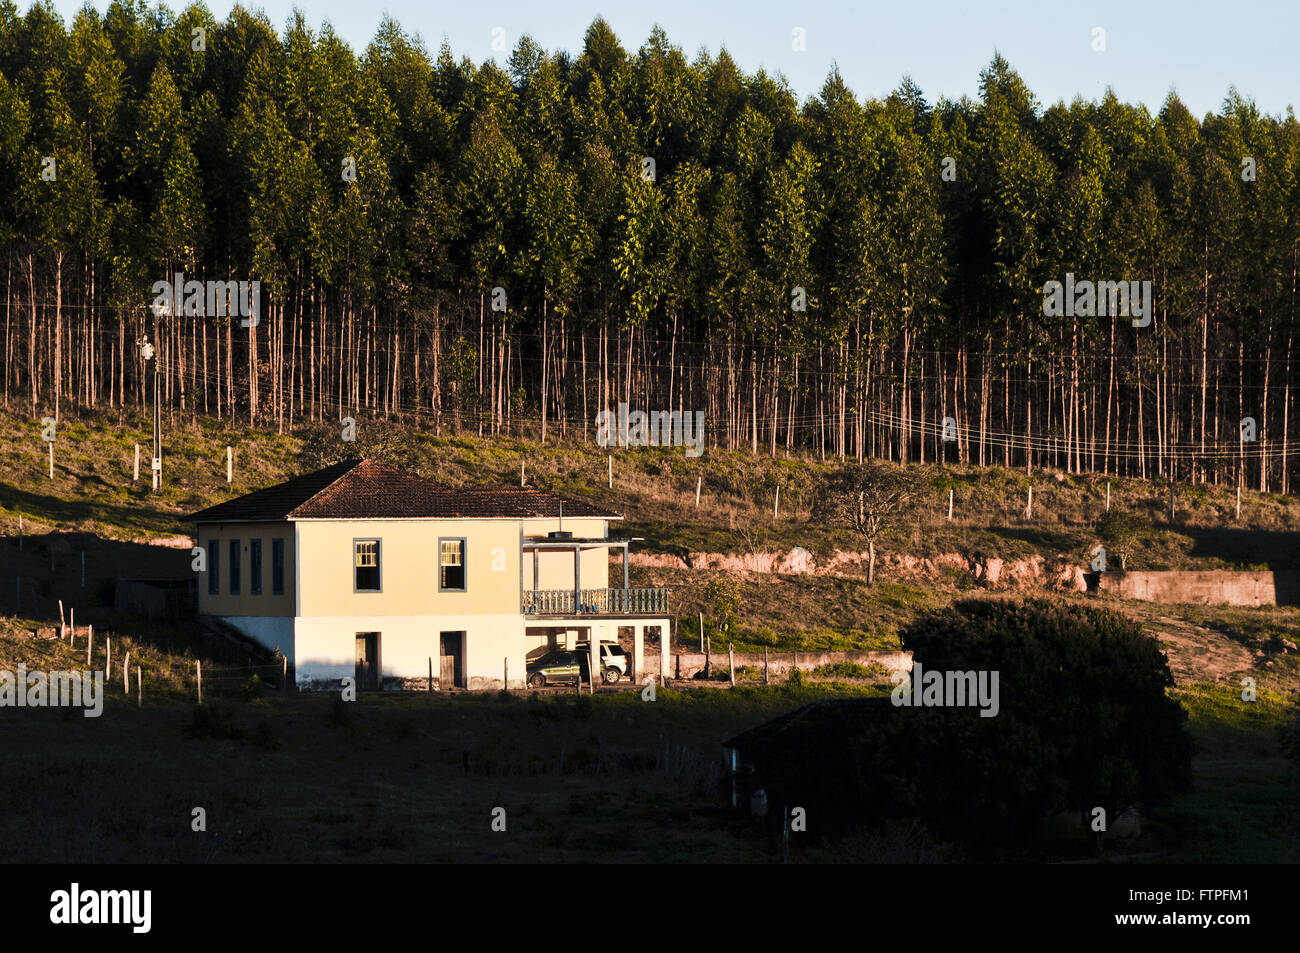 Sunsets in rural housing estate with pine forest in the background Stock Photo